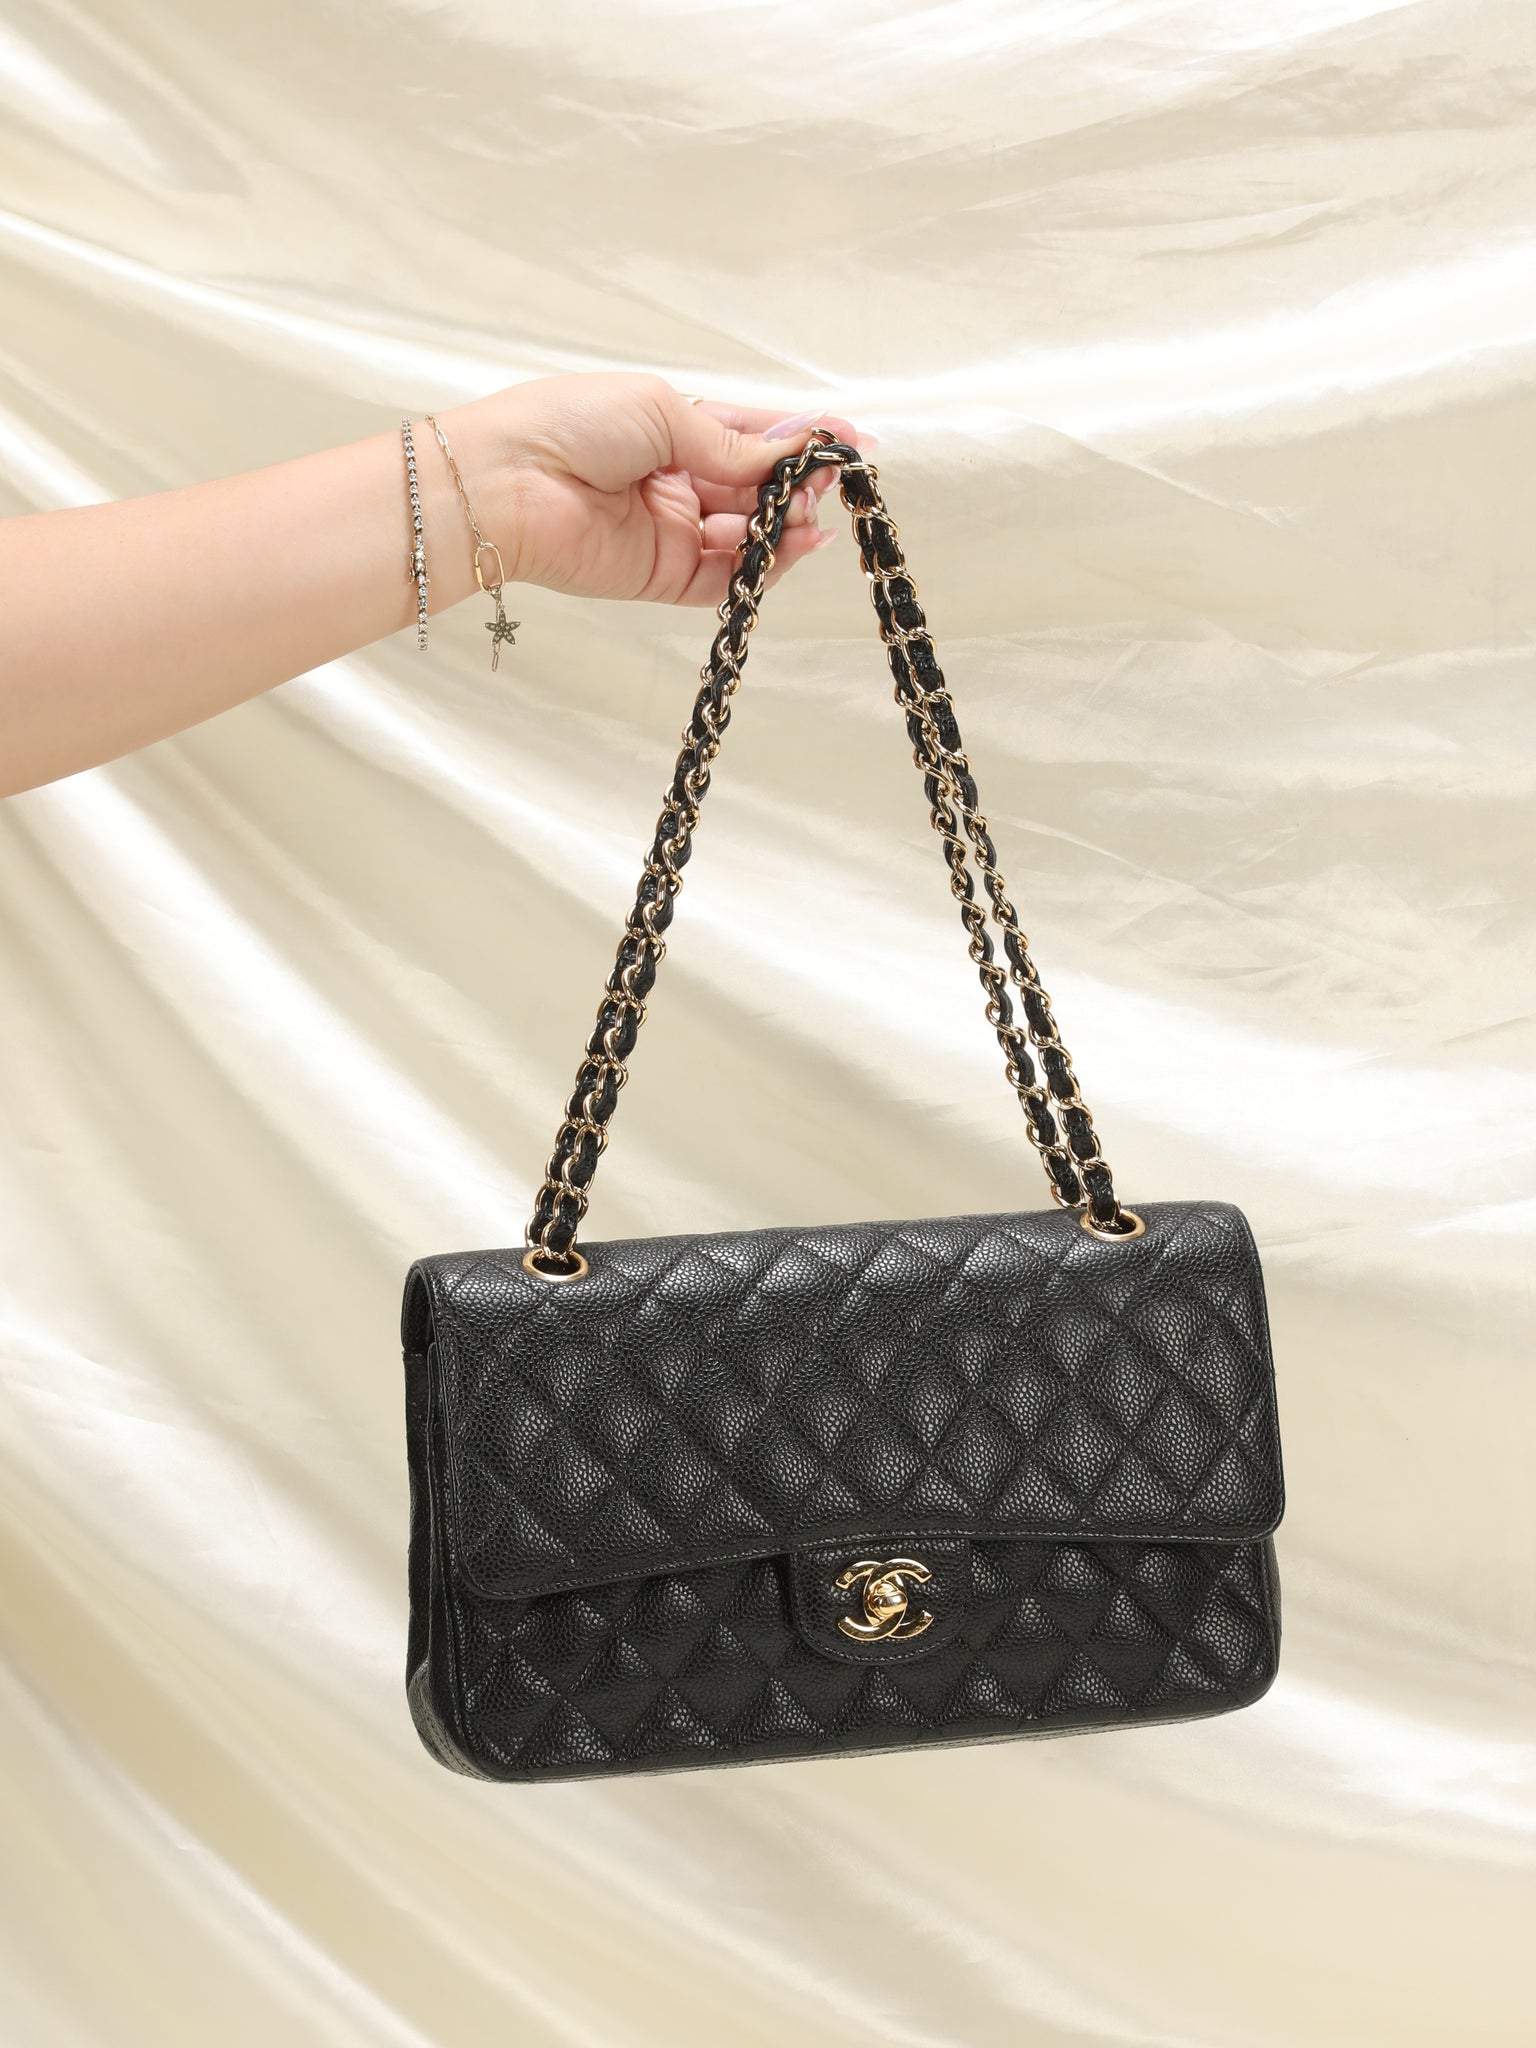 Chanel Classic Medium Double Flap, Black Caviar Leather, Silver Hardware,  Preowned in Dustbag